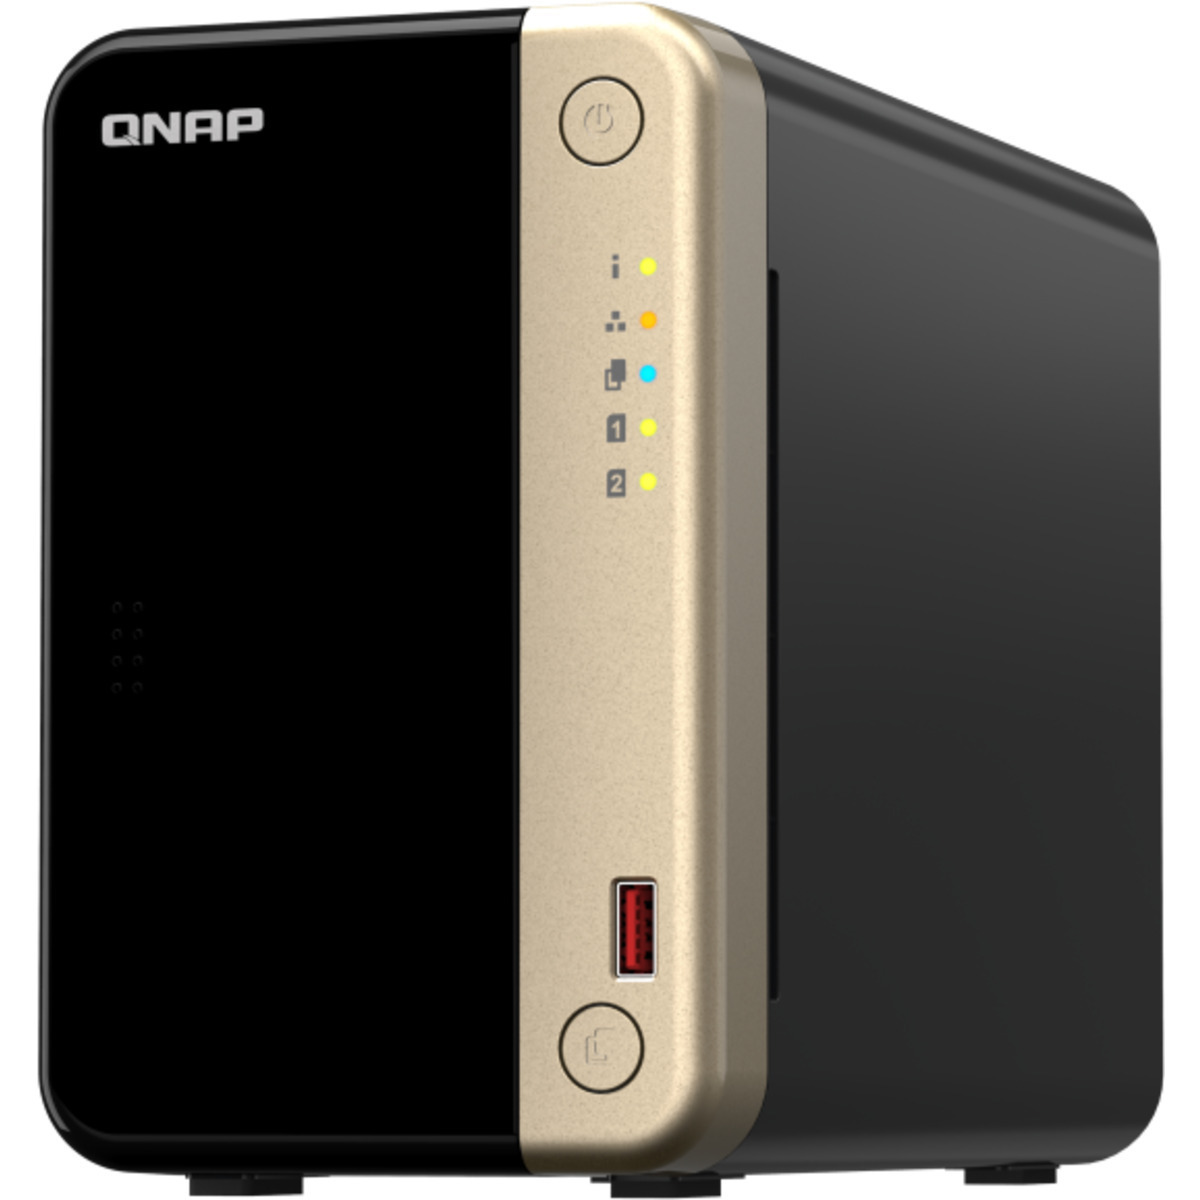 QNAP TS-264 8tb 2-Bay Desktop Multimedia / Power User / Business NAS - Network Attached Storage Device 2x4tb Crucial MX500 CT4000MX500SSD1 2.5 560/510MB/s SATA 6Gb/s SSD CONSUMER Class Drives Installed - Burn-In Tested - ON SALE TS-264